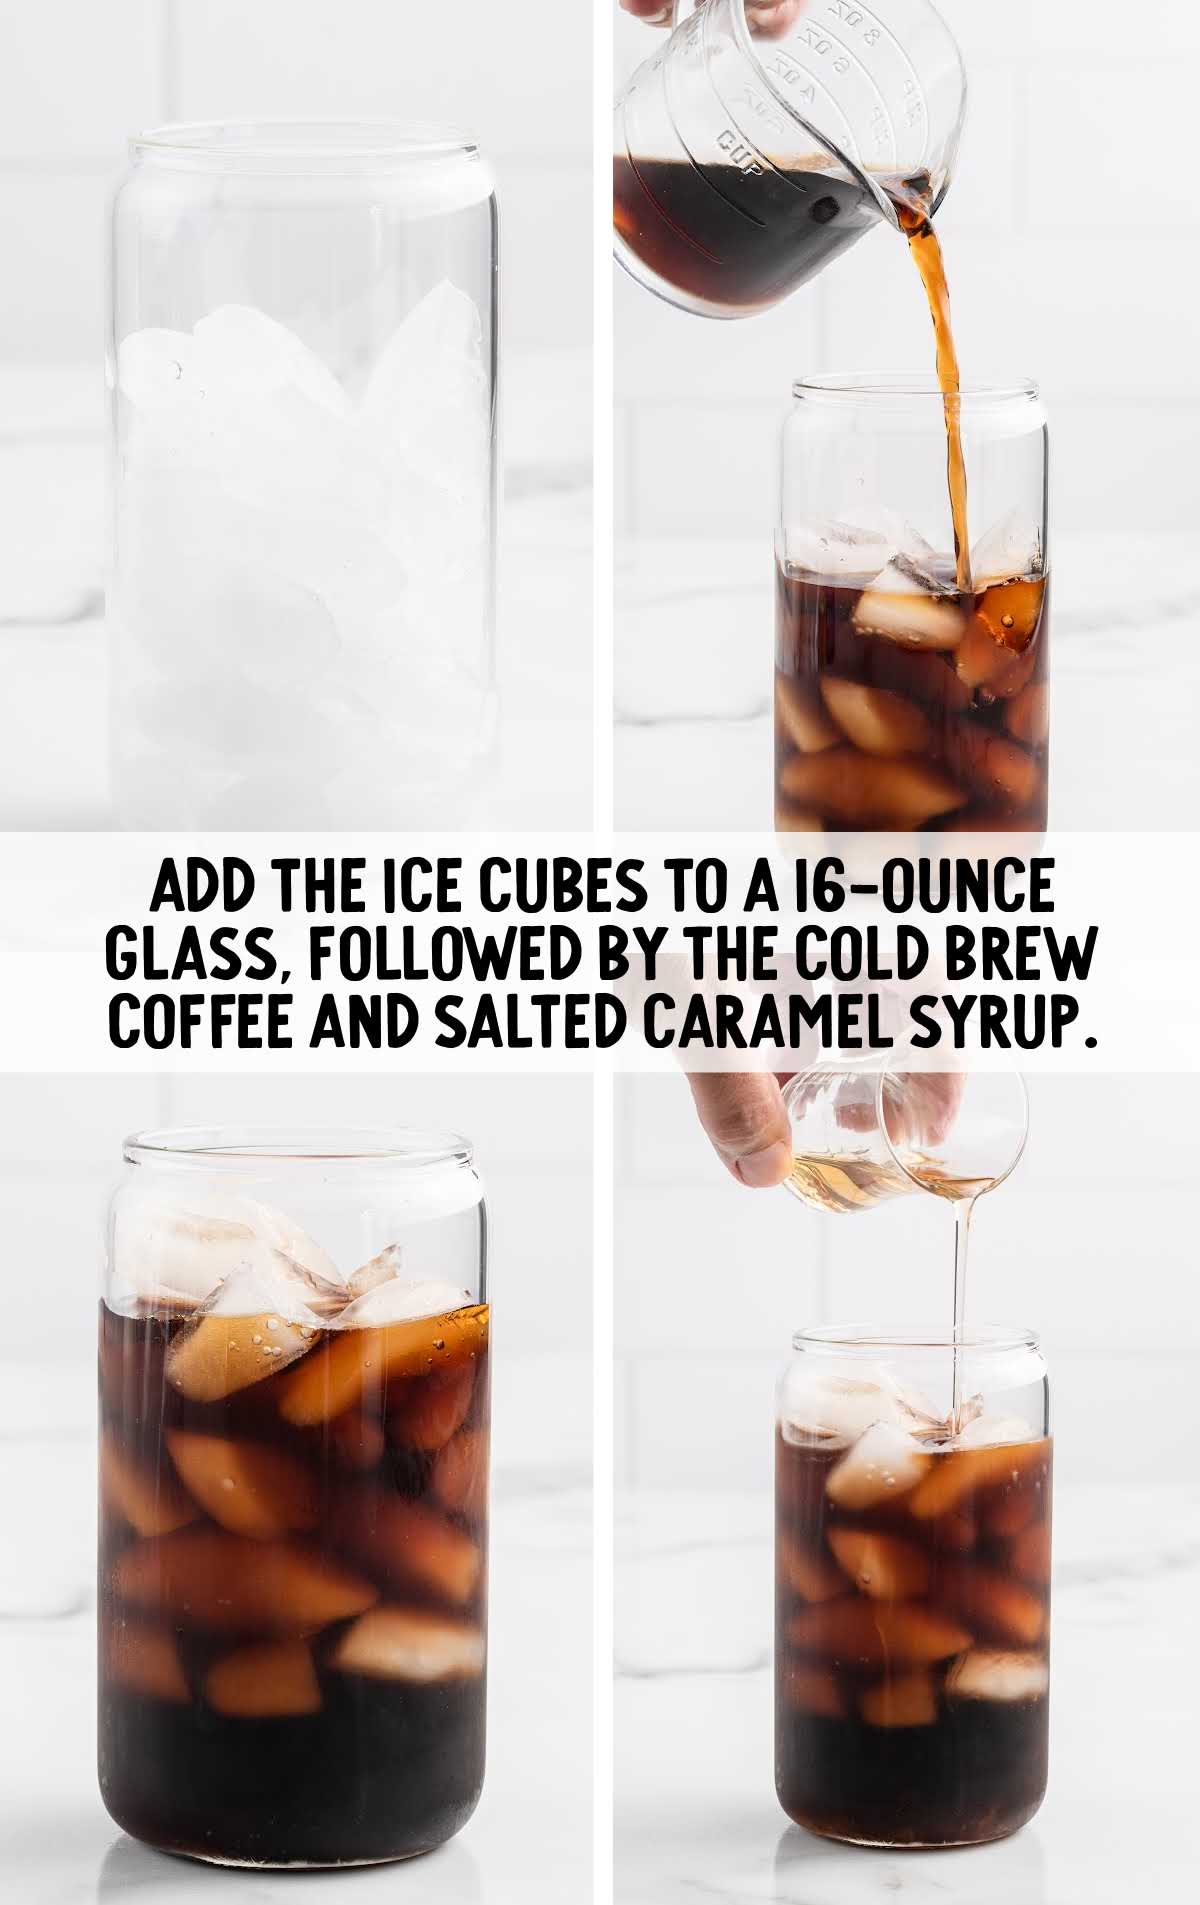 ice cubes, cold brew coffee, and salted caramel syrup added to the glass